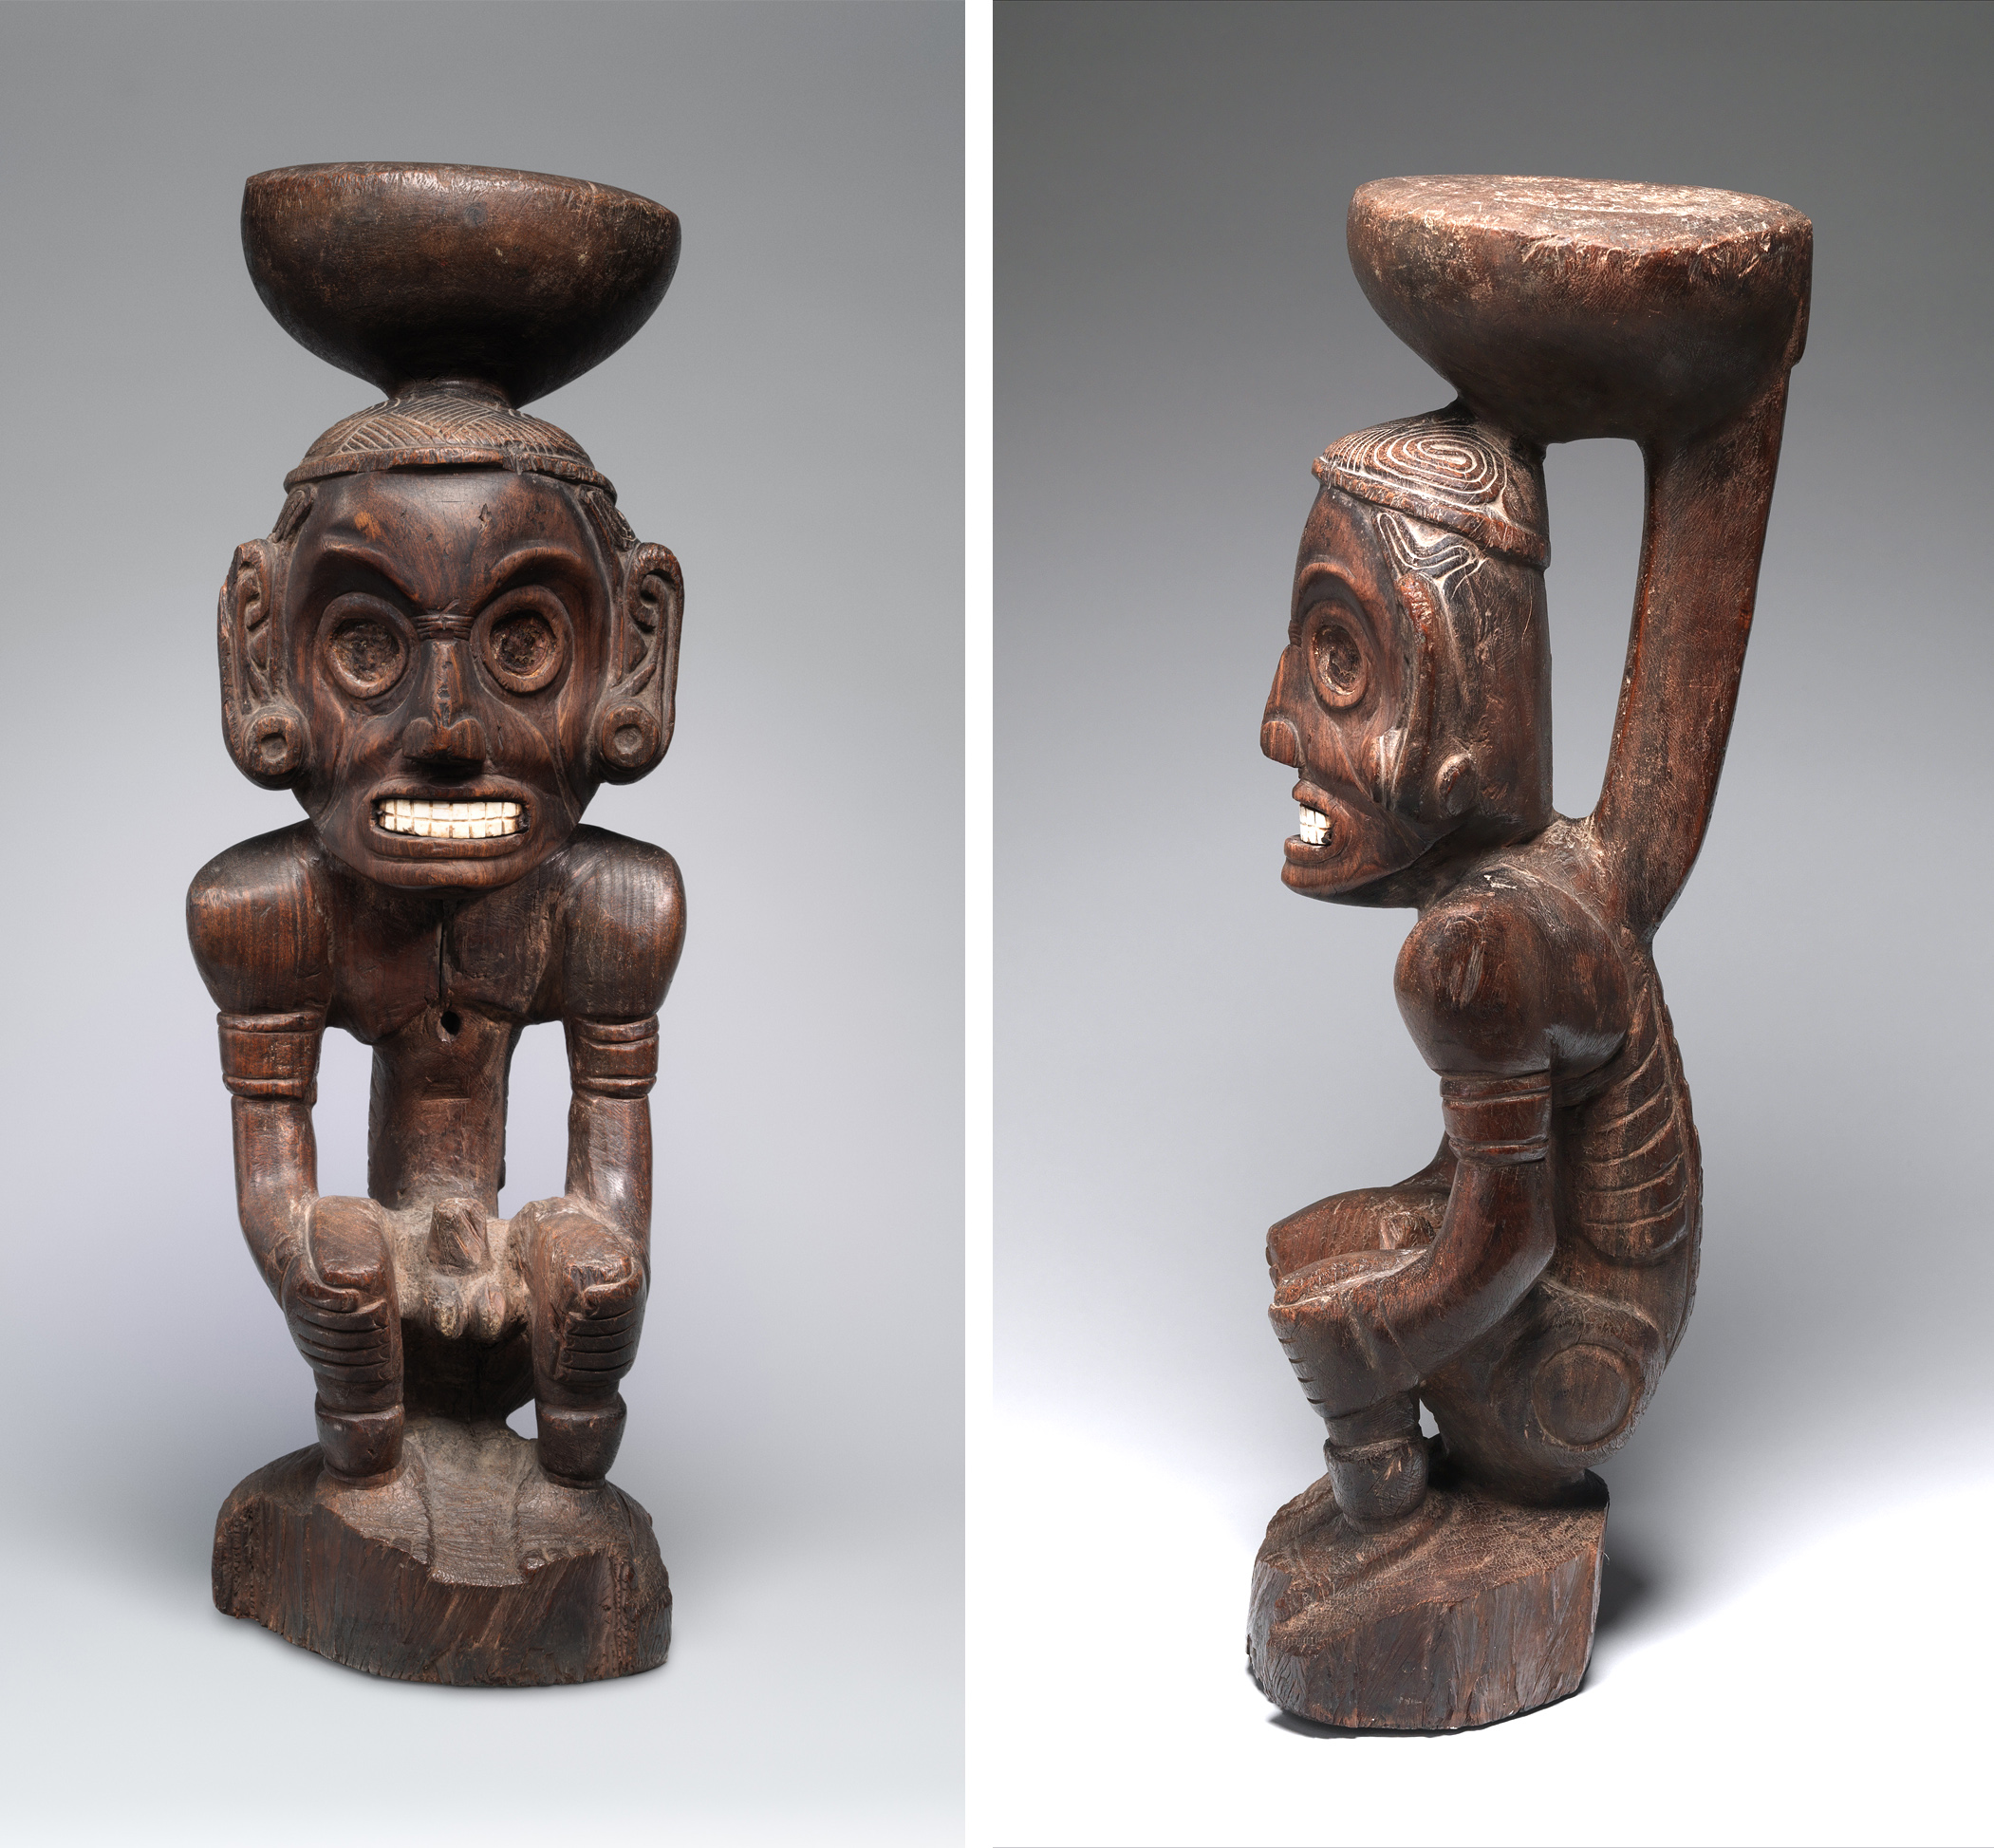 Taíno artist, Zemí, c. 1000, wood and shell, from the Dominican Republic (The Metropolitan Museum of Art)